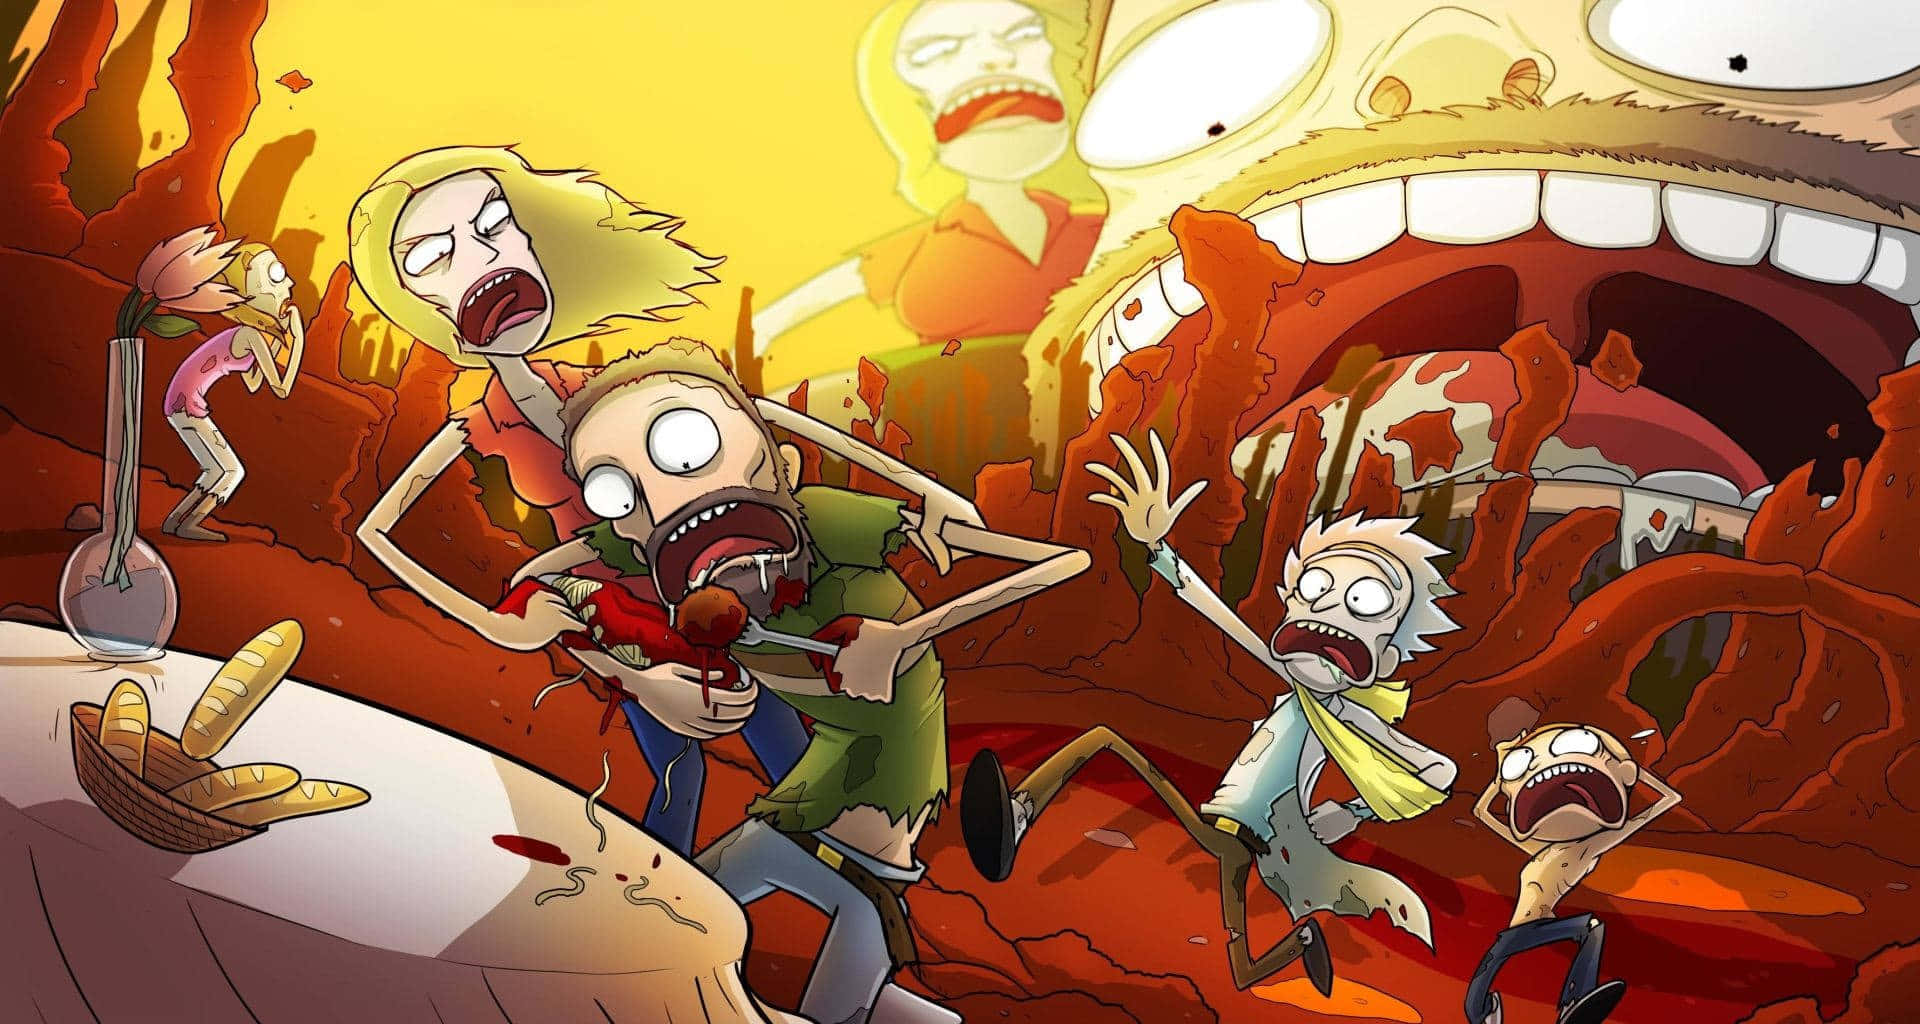 Supercharge your laptop with Rick and Morty Wallpaper